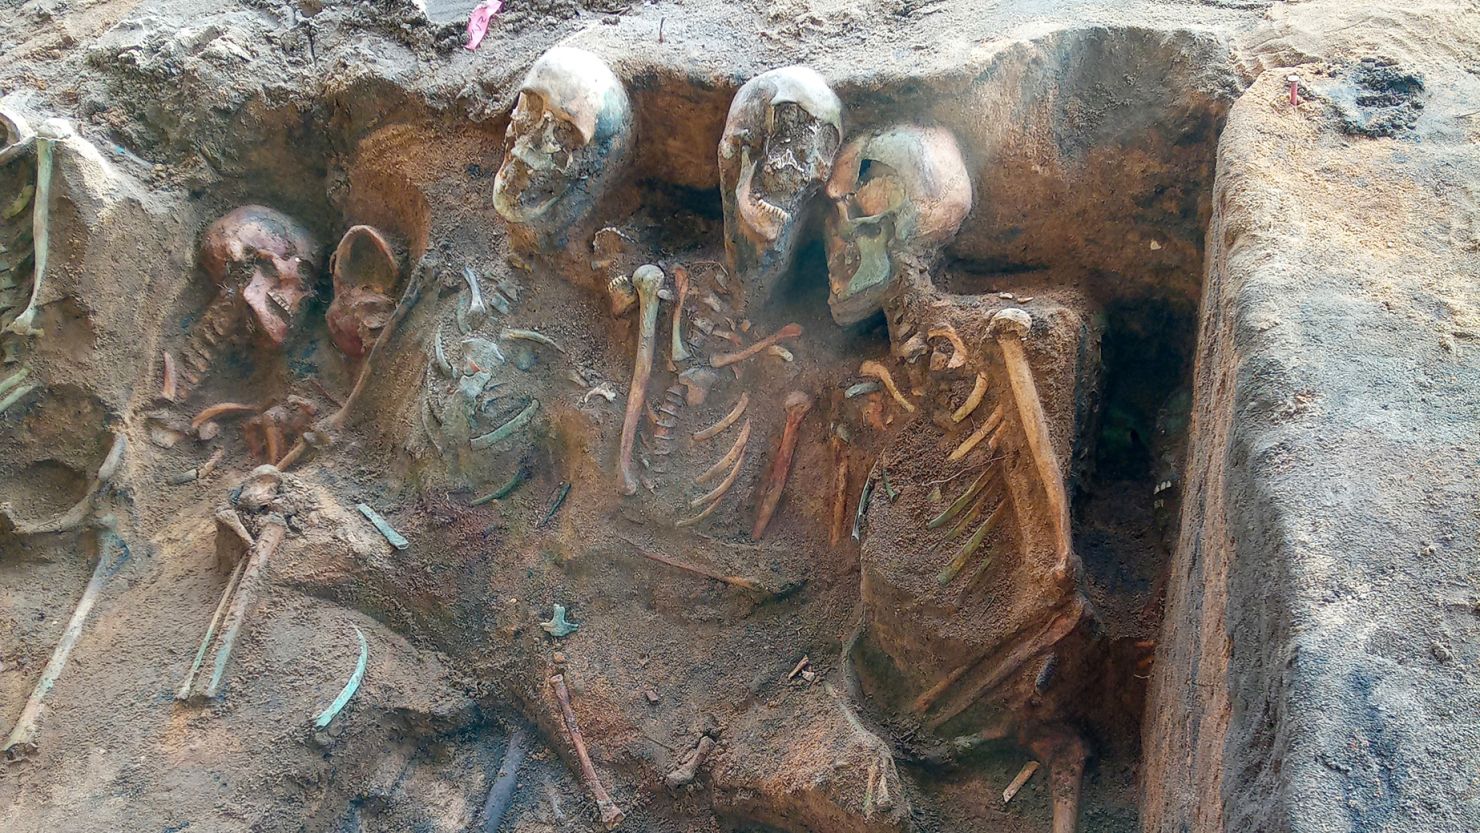 Tightly packed remains in the mass grave